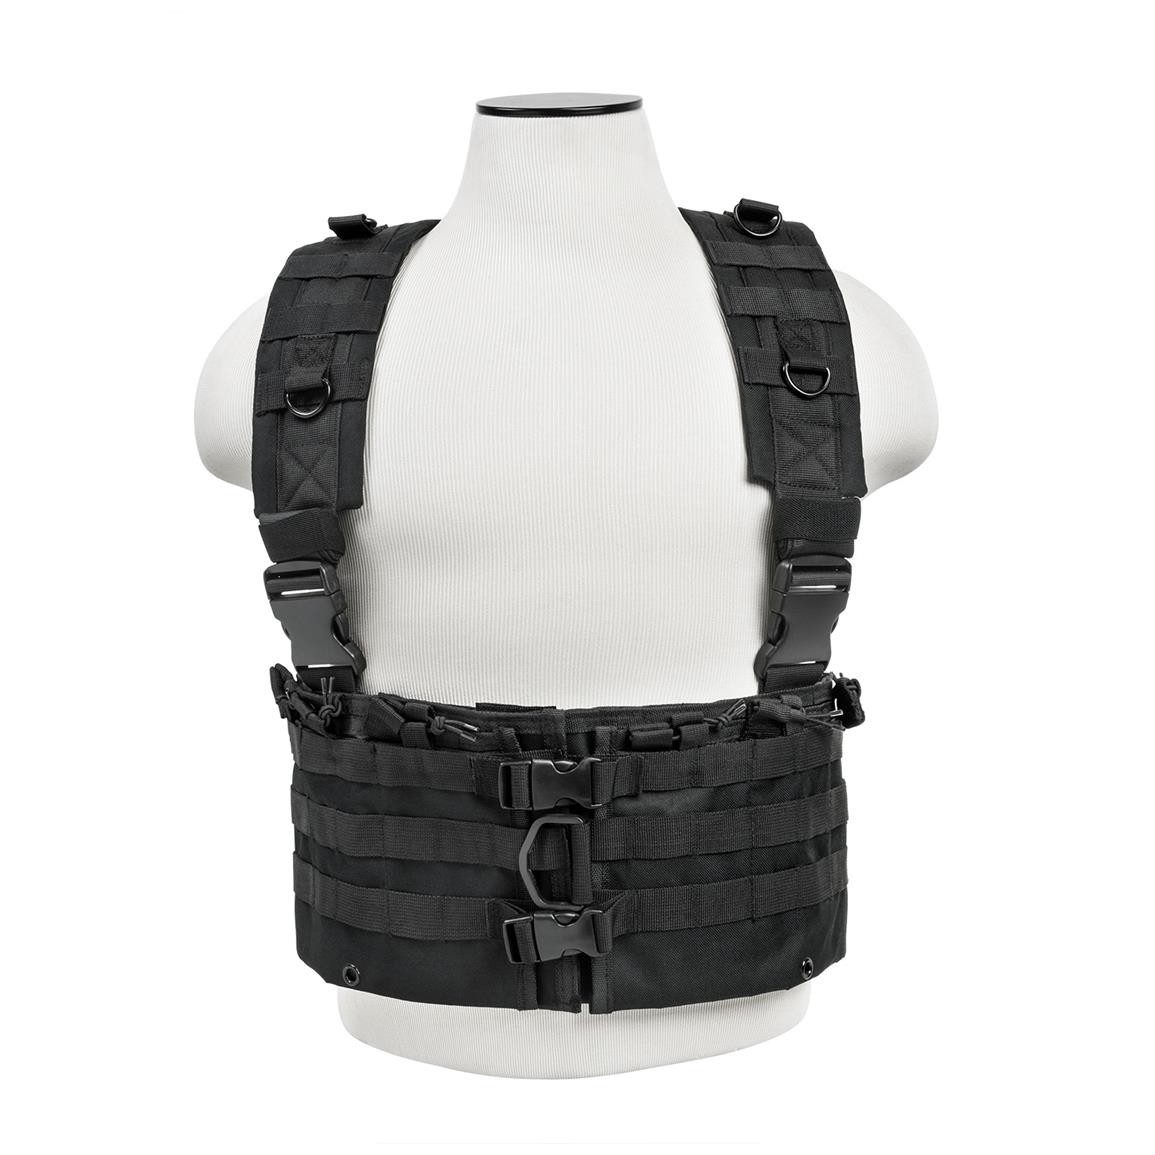 VISM by NcSTAR AR Chest Rig - 613596, Tactical Clothing at Sportsman's ...